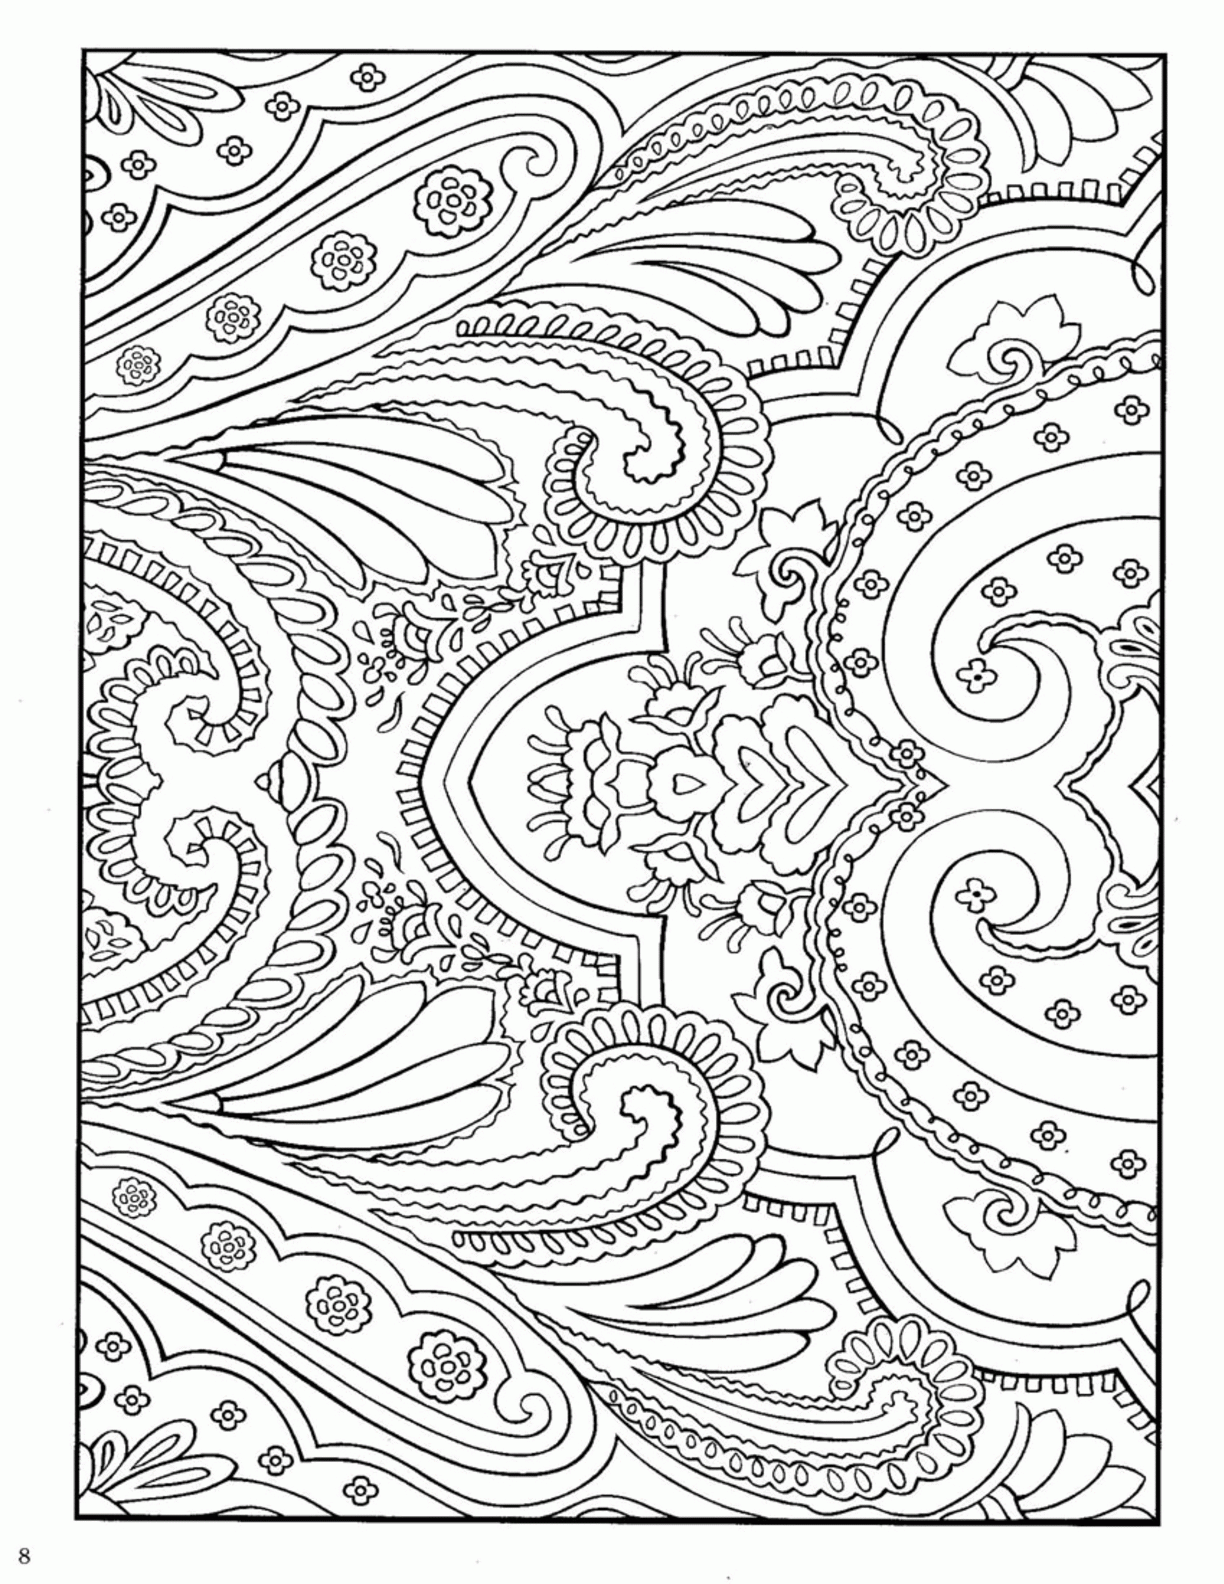 Dover Paisley Designs Coloring Book Katie Take A Look Pinterest ...